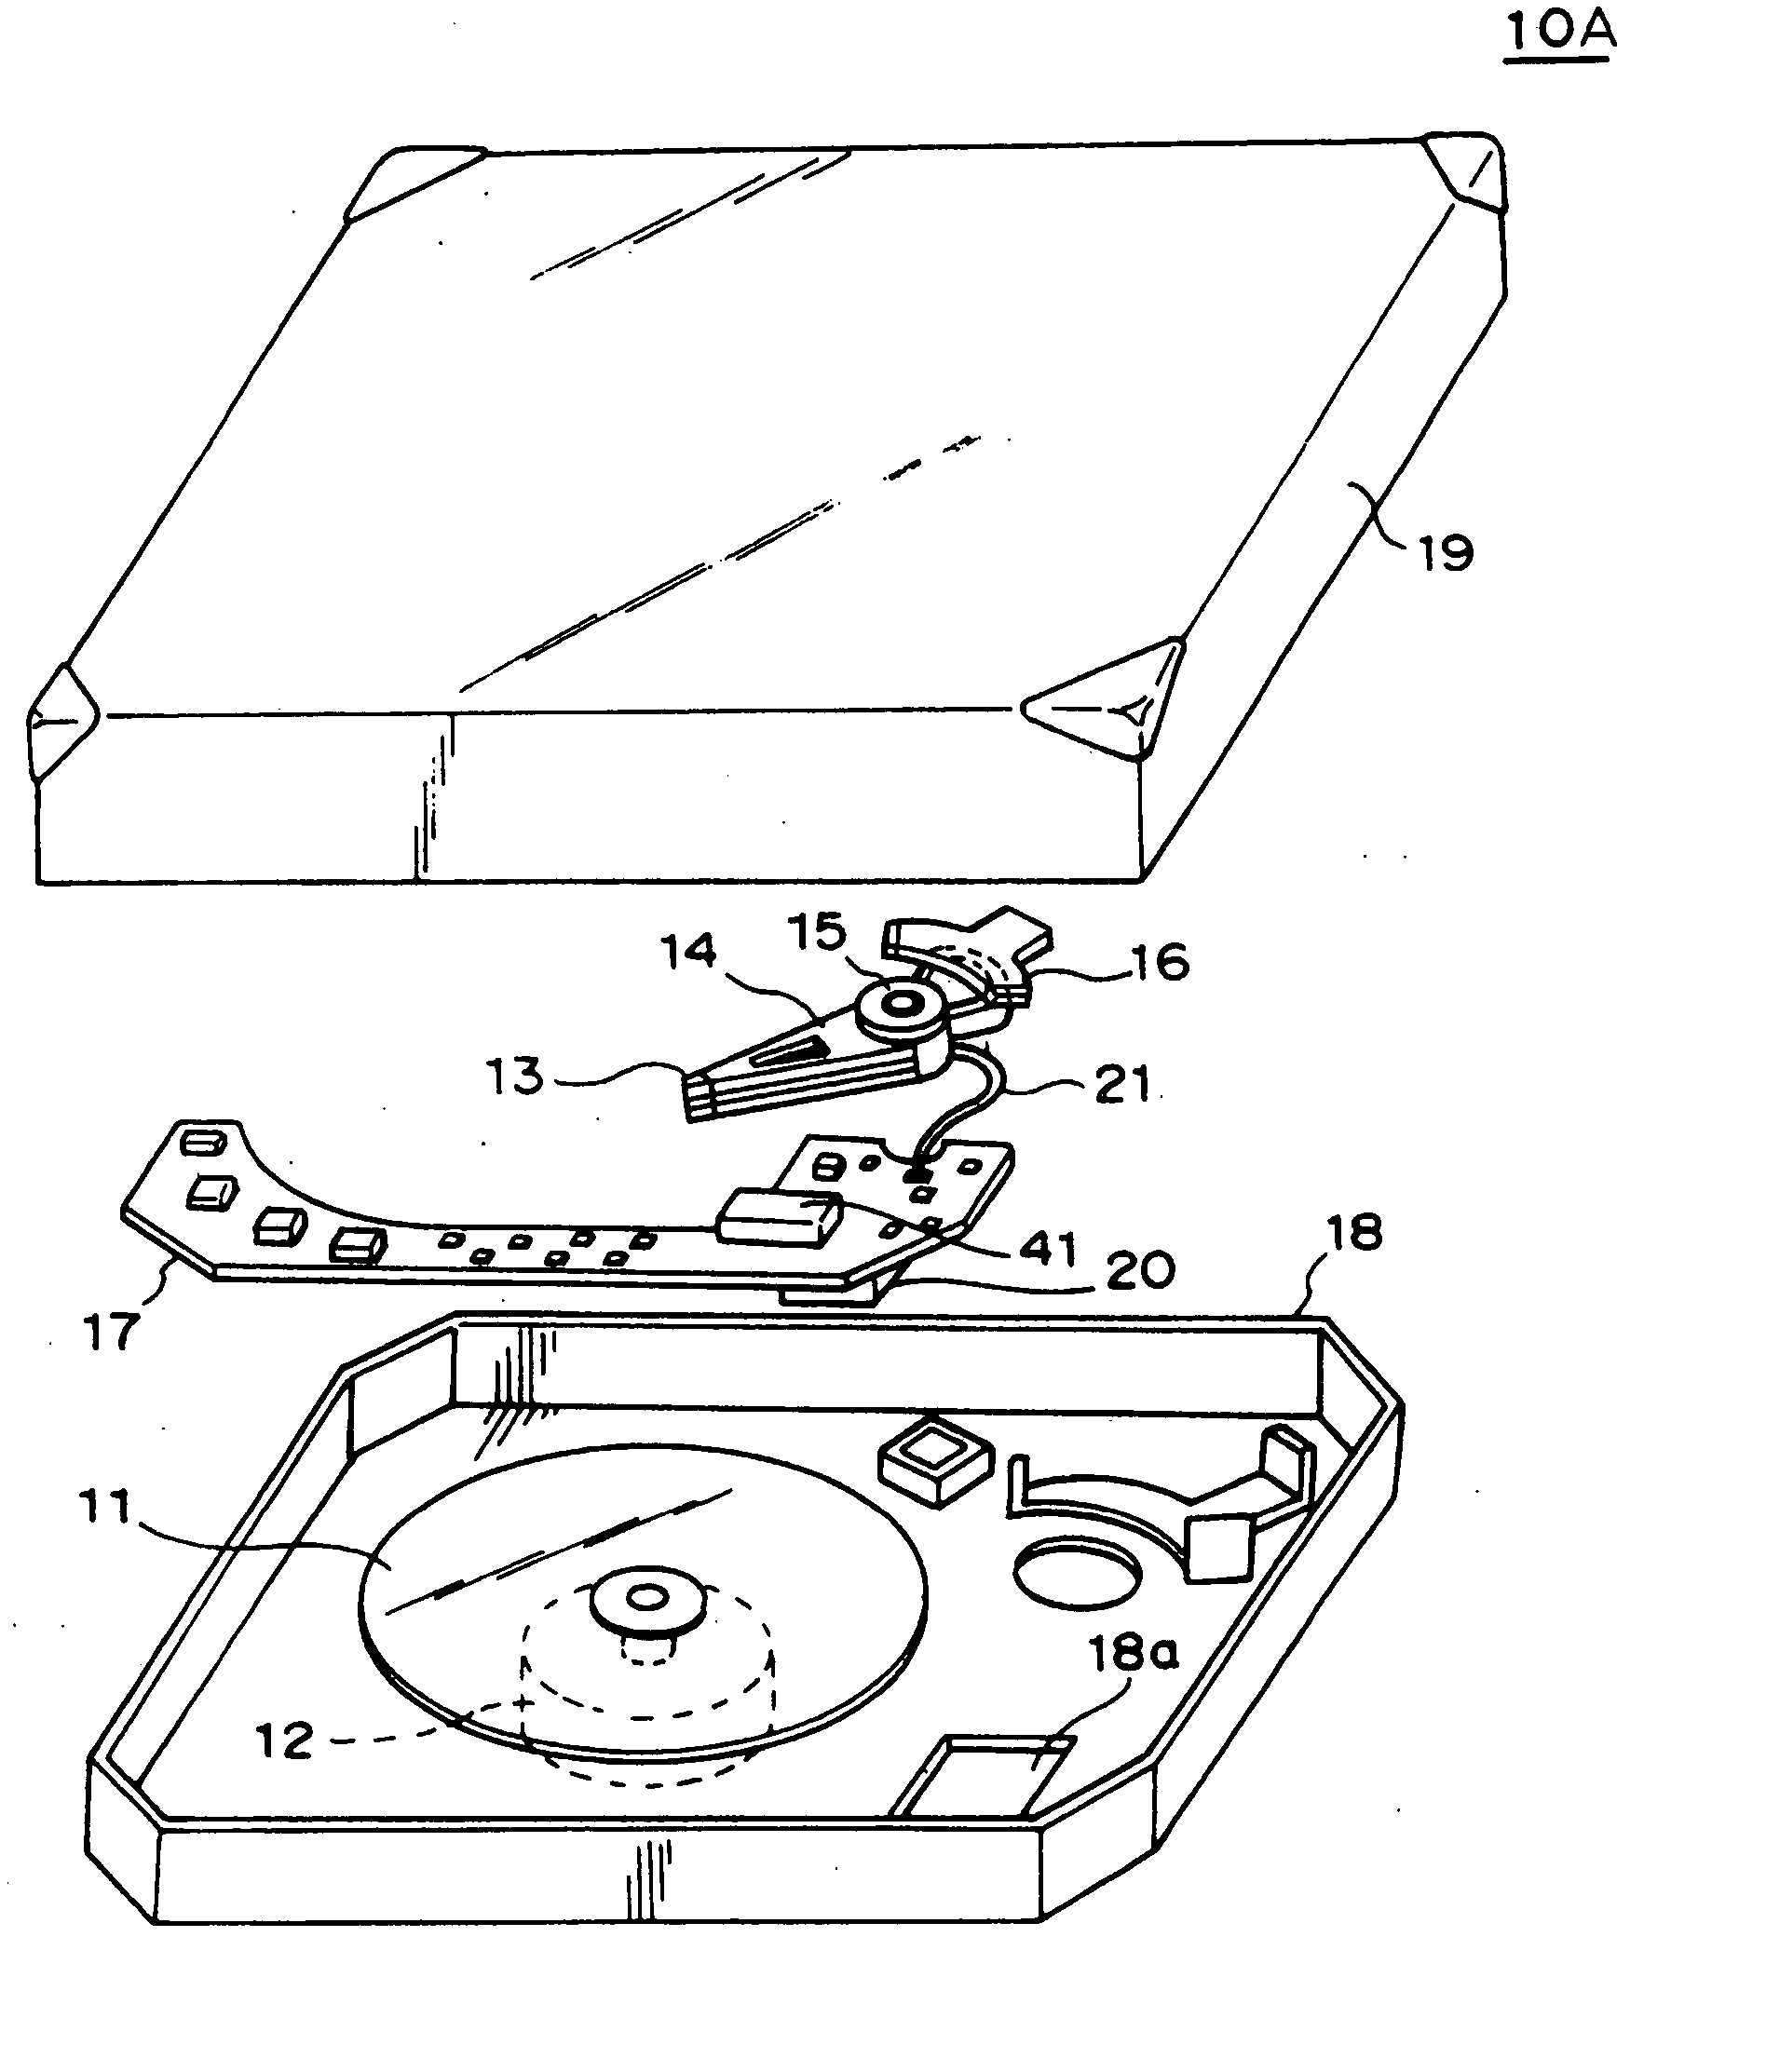 Hard disk drive and wireless data terminal using the same